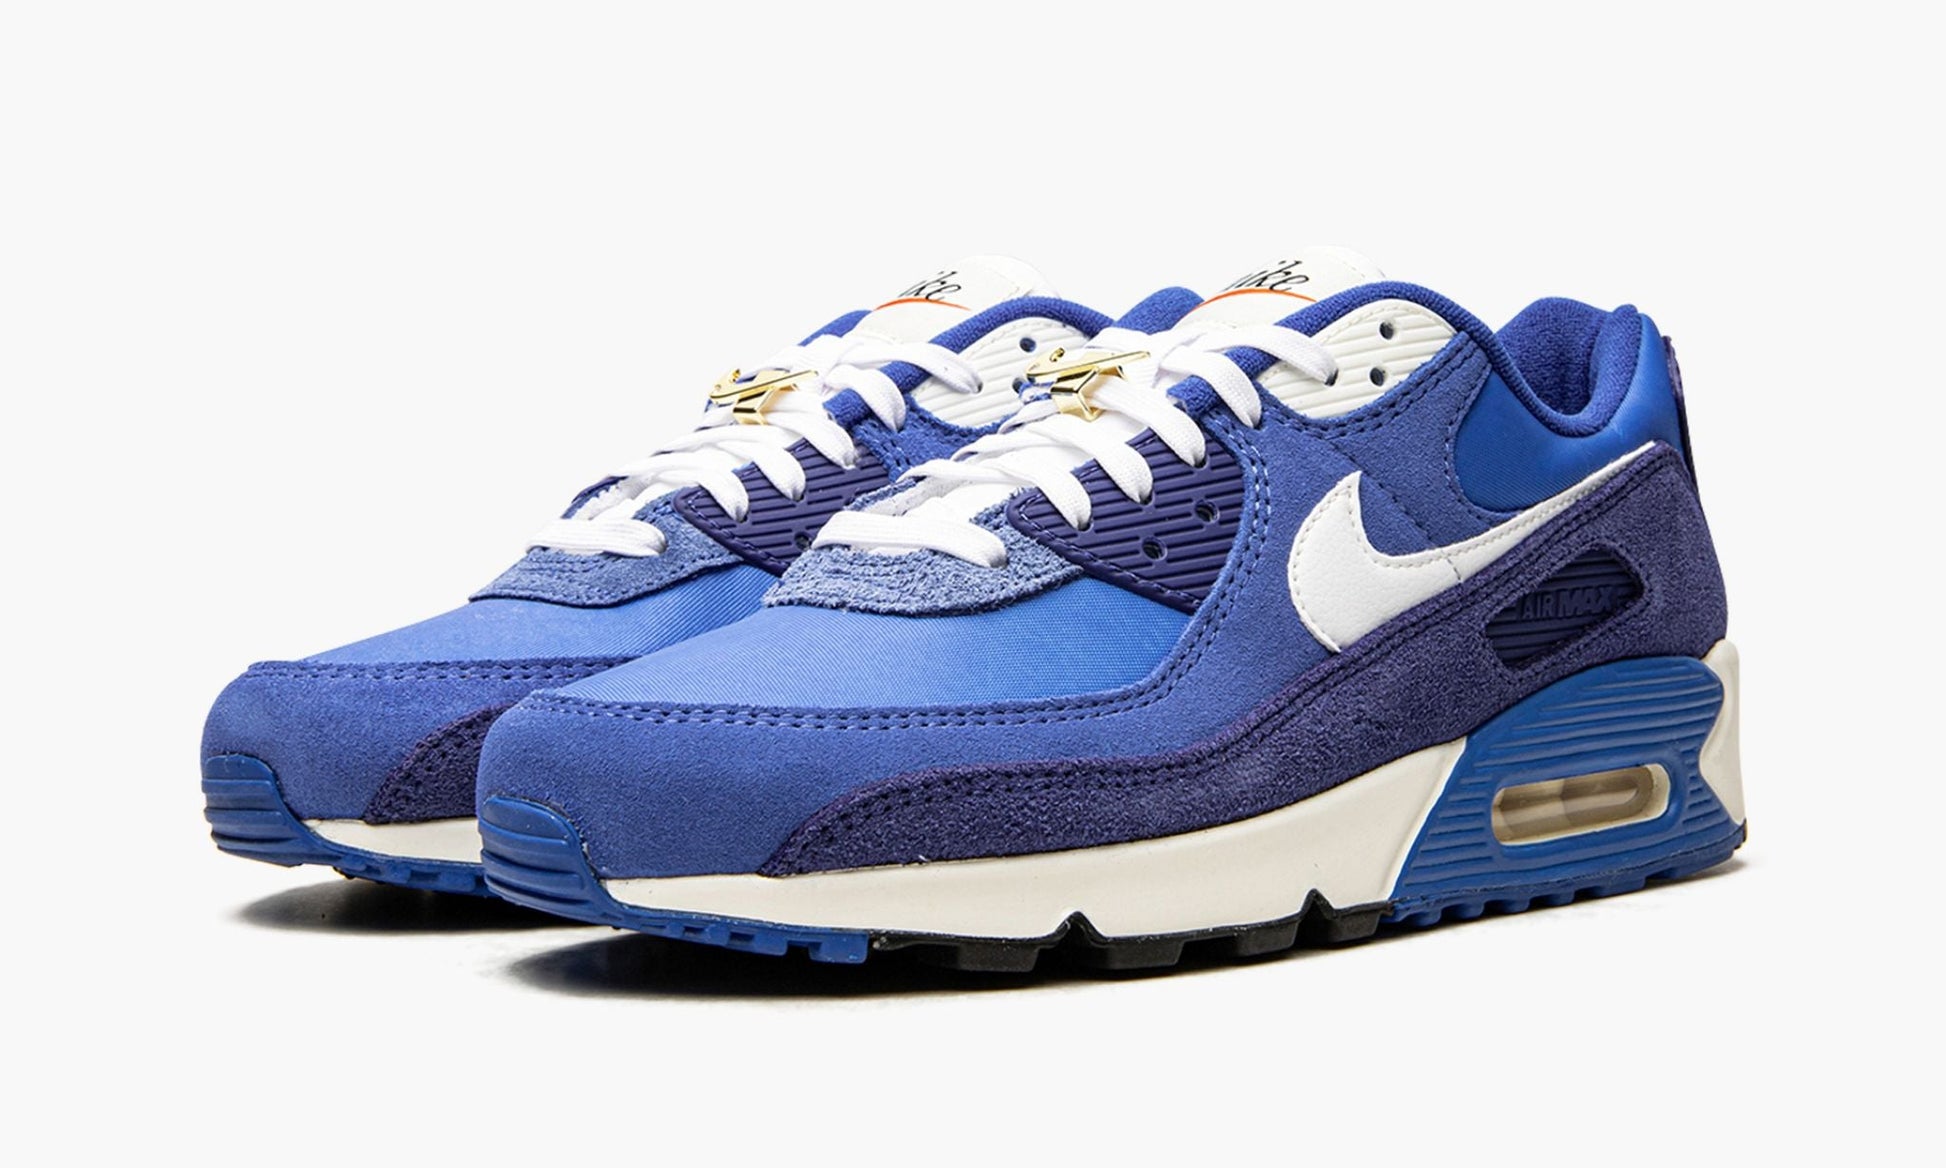 AIR MAX 90 SE "FIRST USE PACK - SIGNAL BLUE"